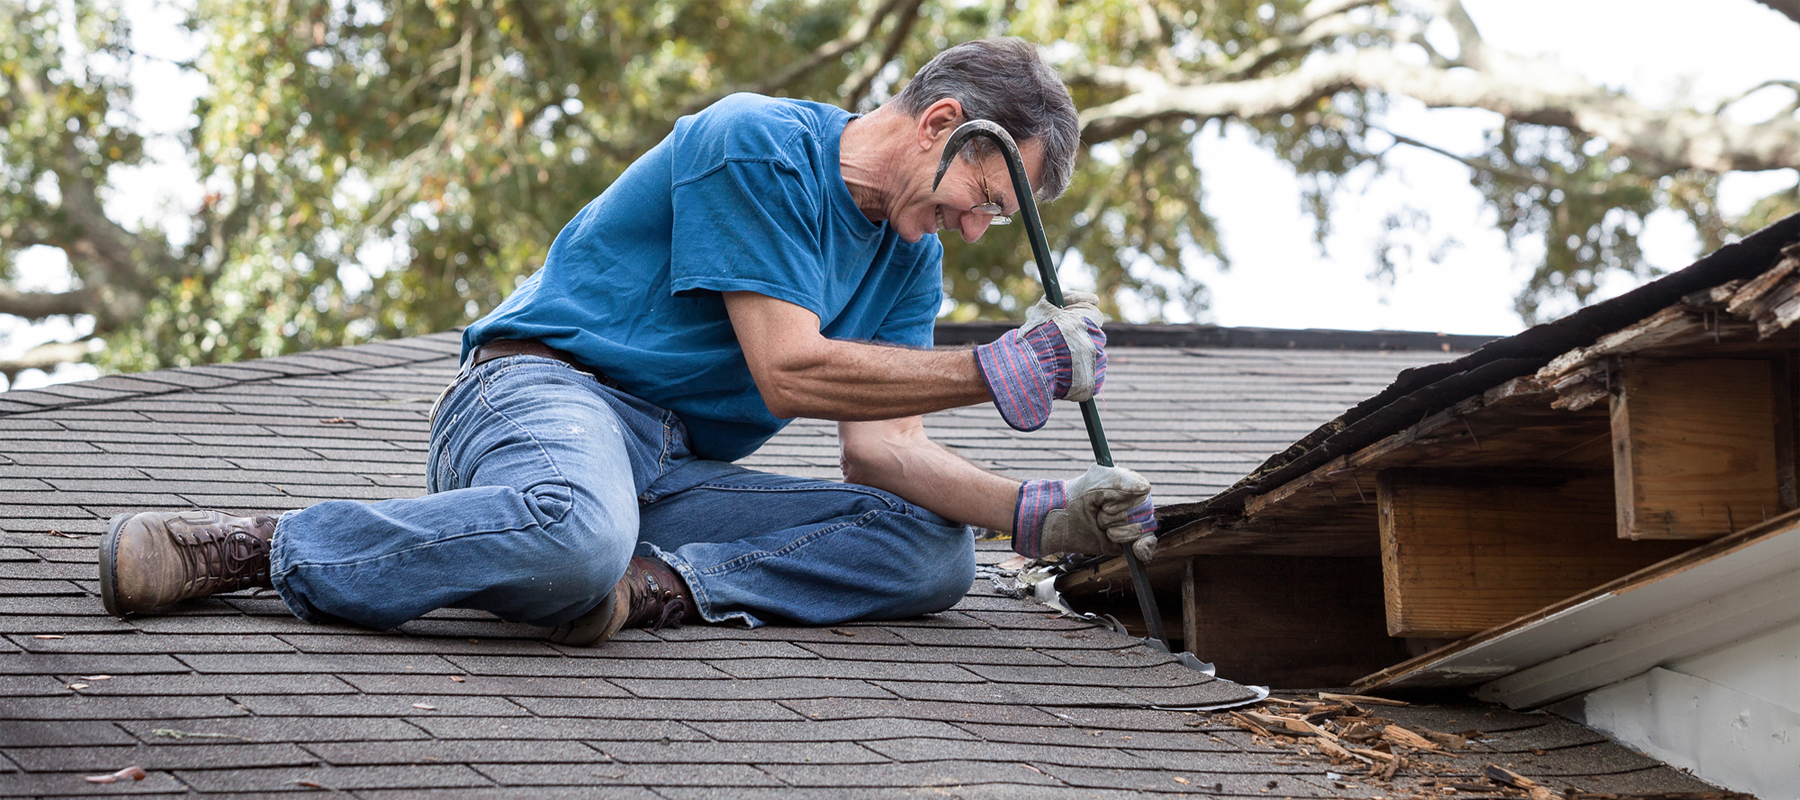 A man on a Roof Doing a Repair